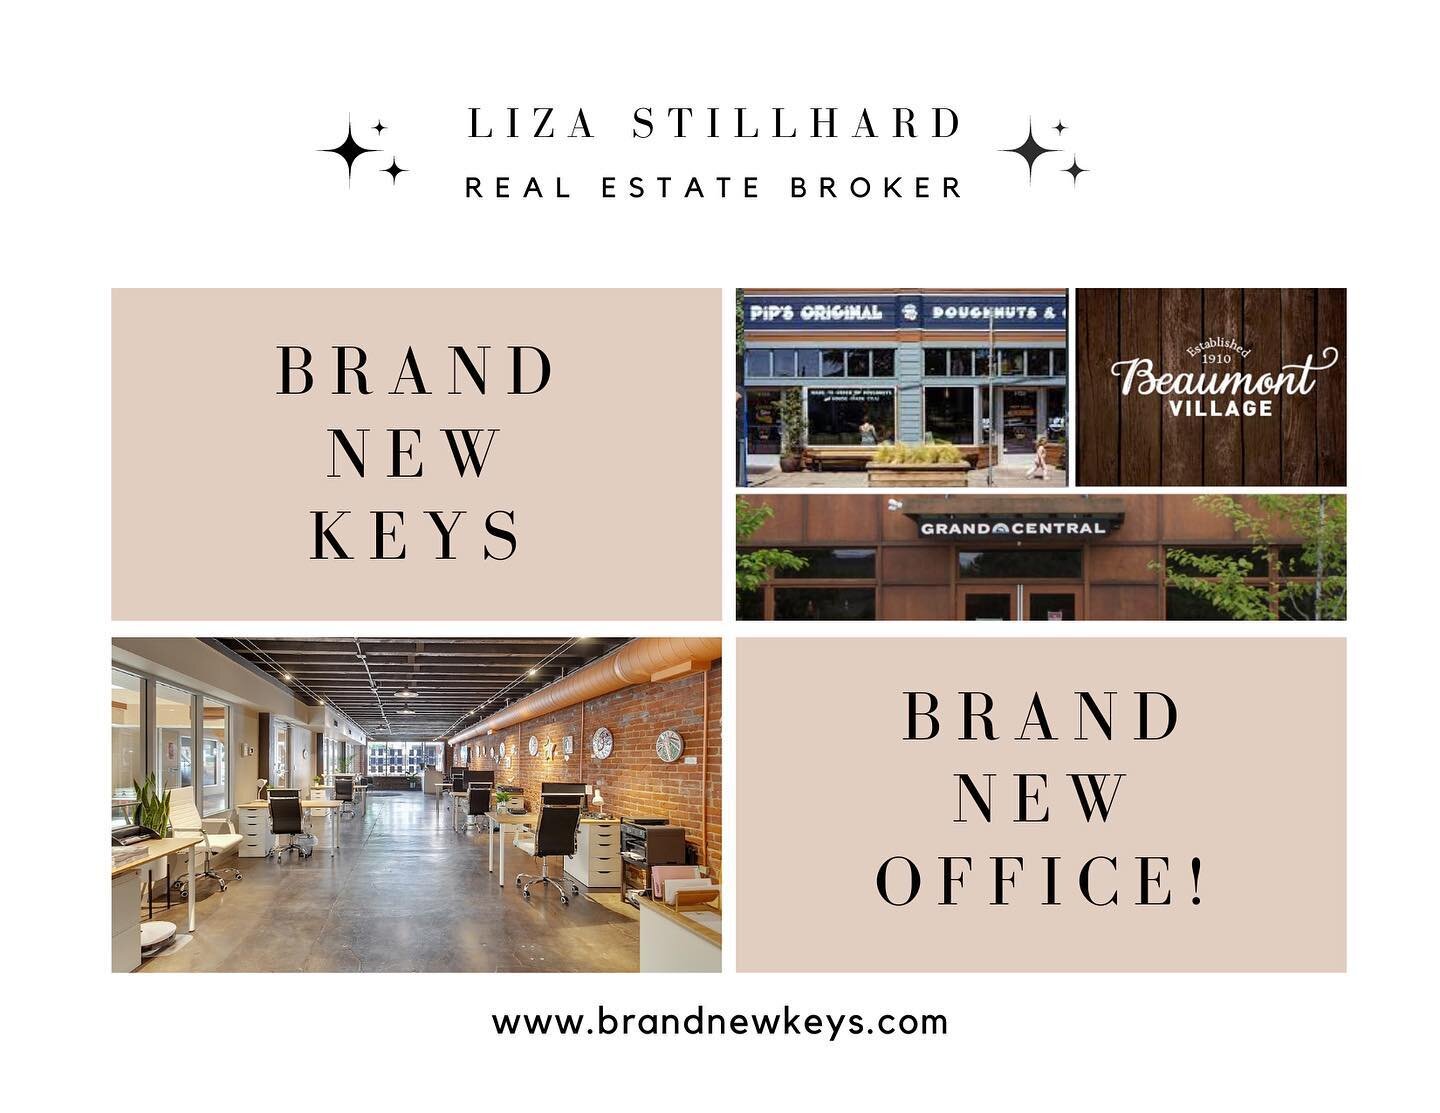 My office has a brand new address!  4743 NE Fremont😊  I am thrilled that I have been able to take part in the process of searching for a new space and helping to open this office, which is right in the heart of the bustling Beaumont shops on Fremont